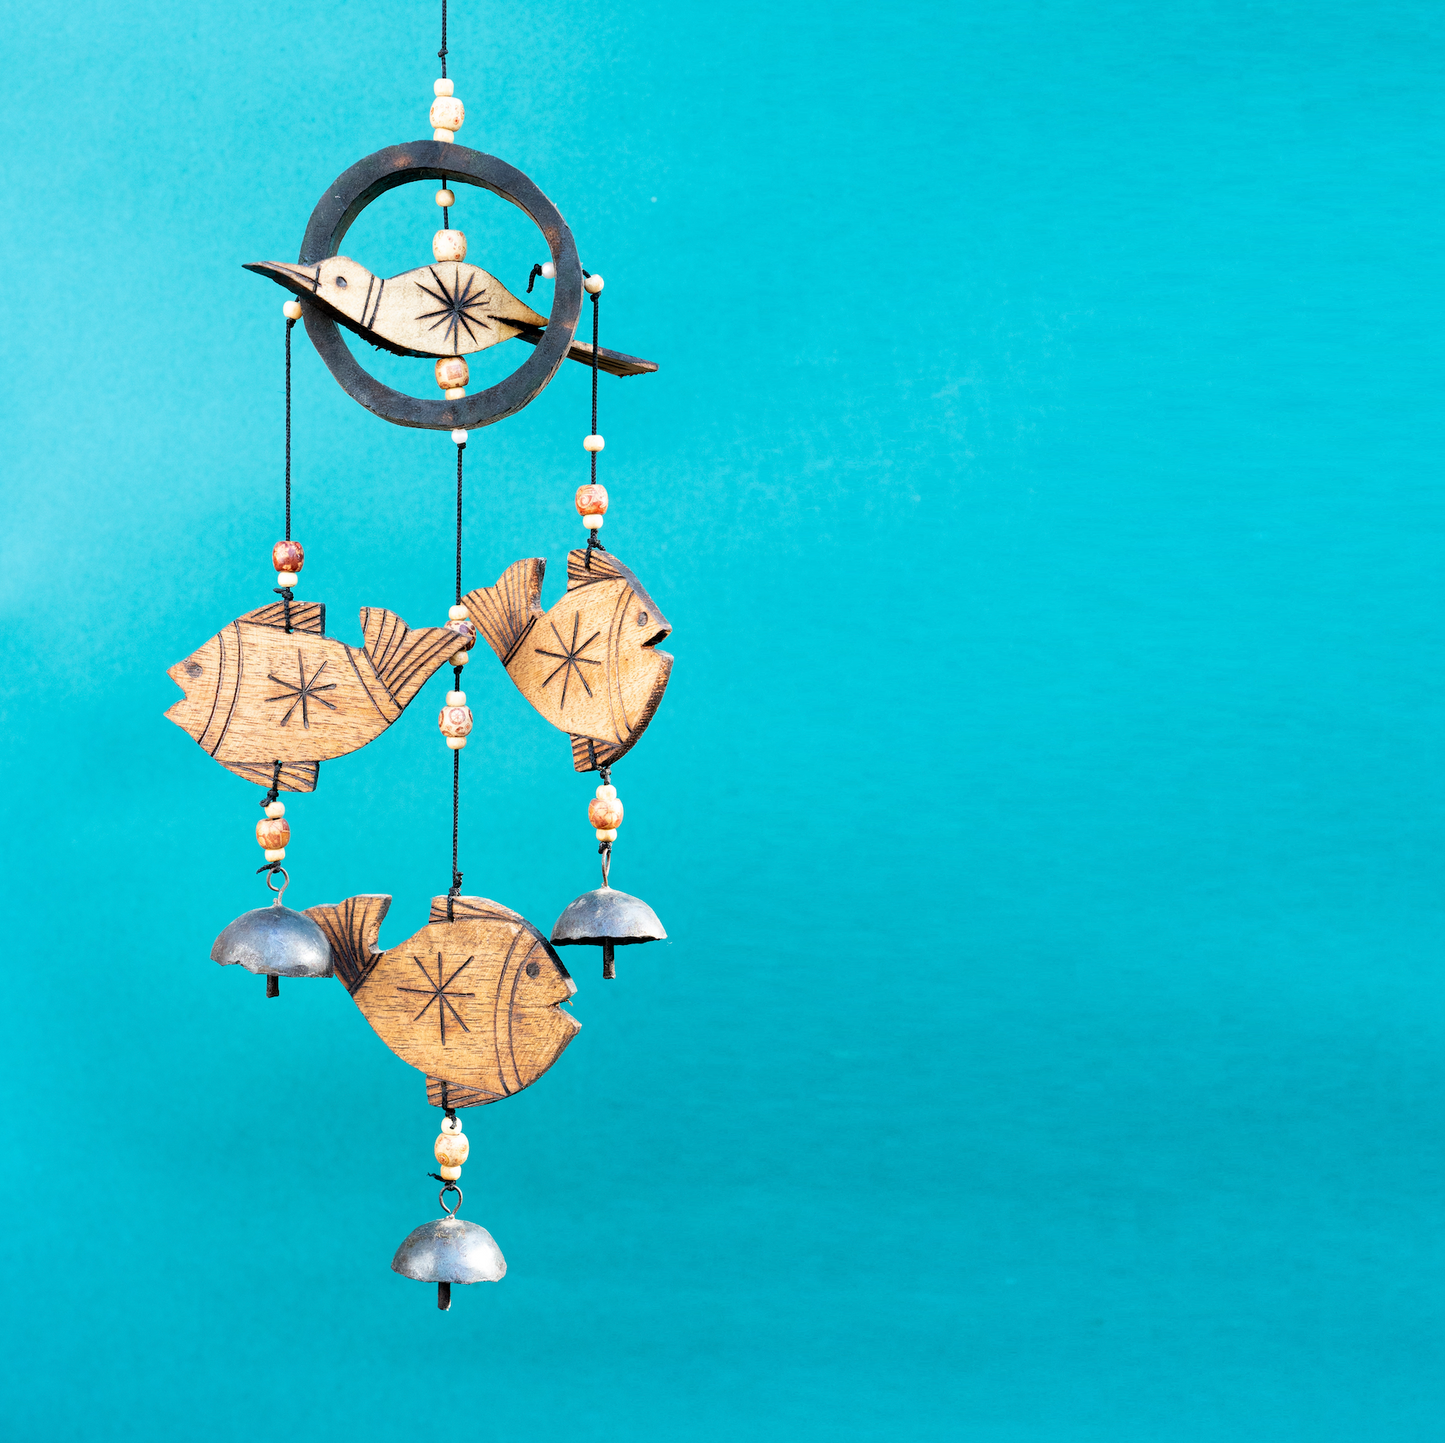 Wind Chime 3 Bell - Hanging Fish with Bird